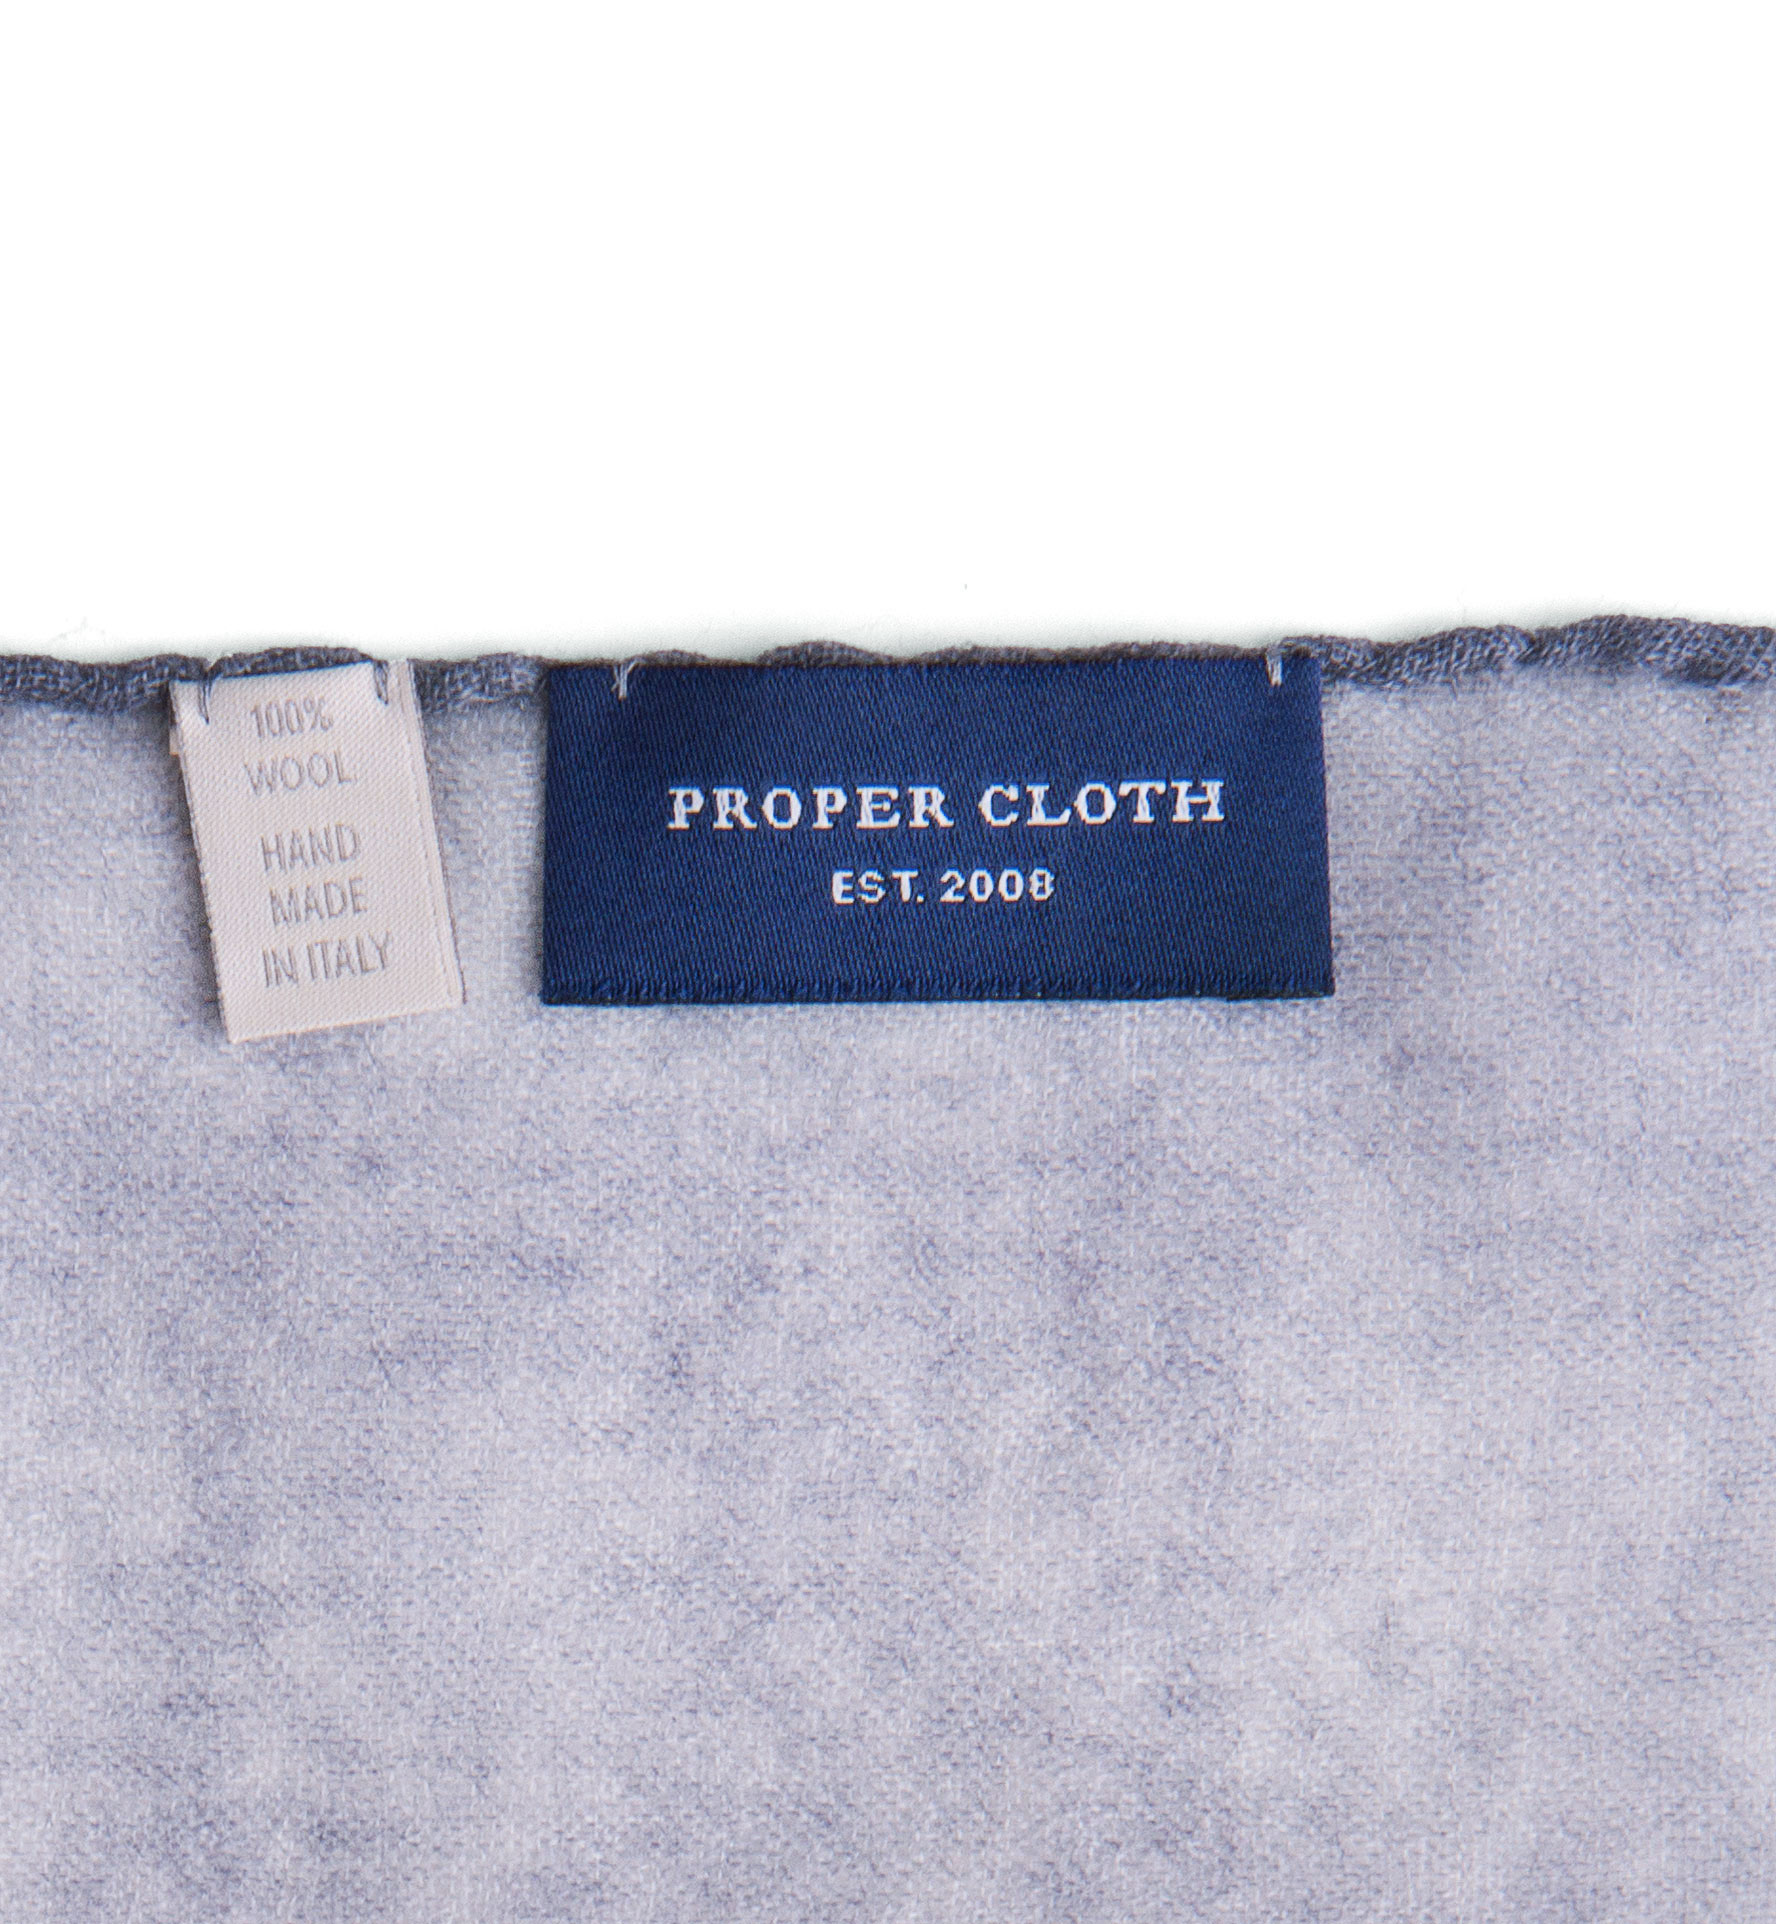 Stone Wool Pocket Square by Proper Cloth